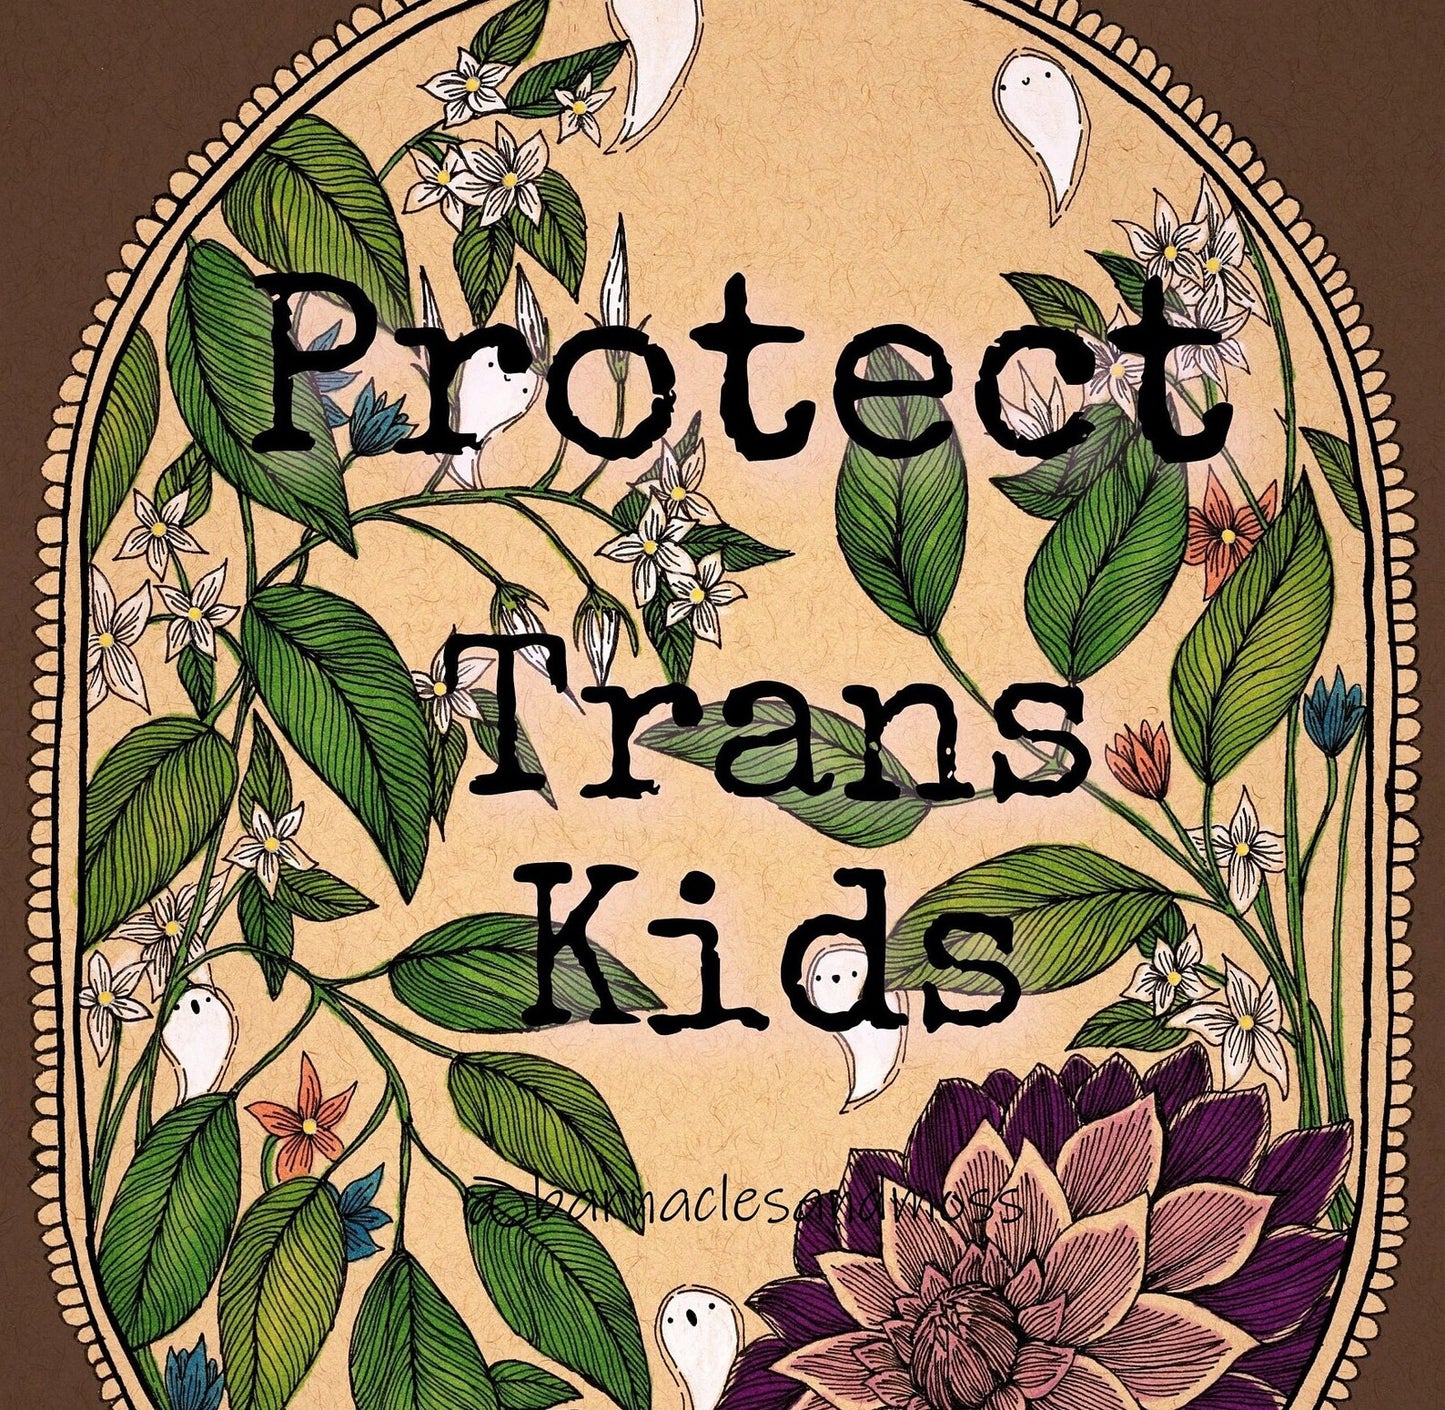 Barnacles and Moss "Protect Trans Kids"